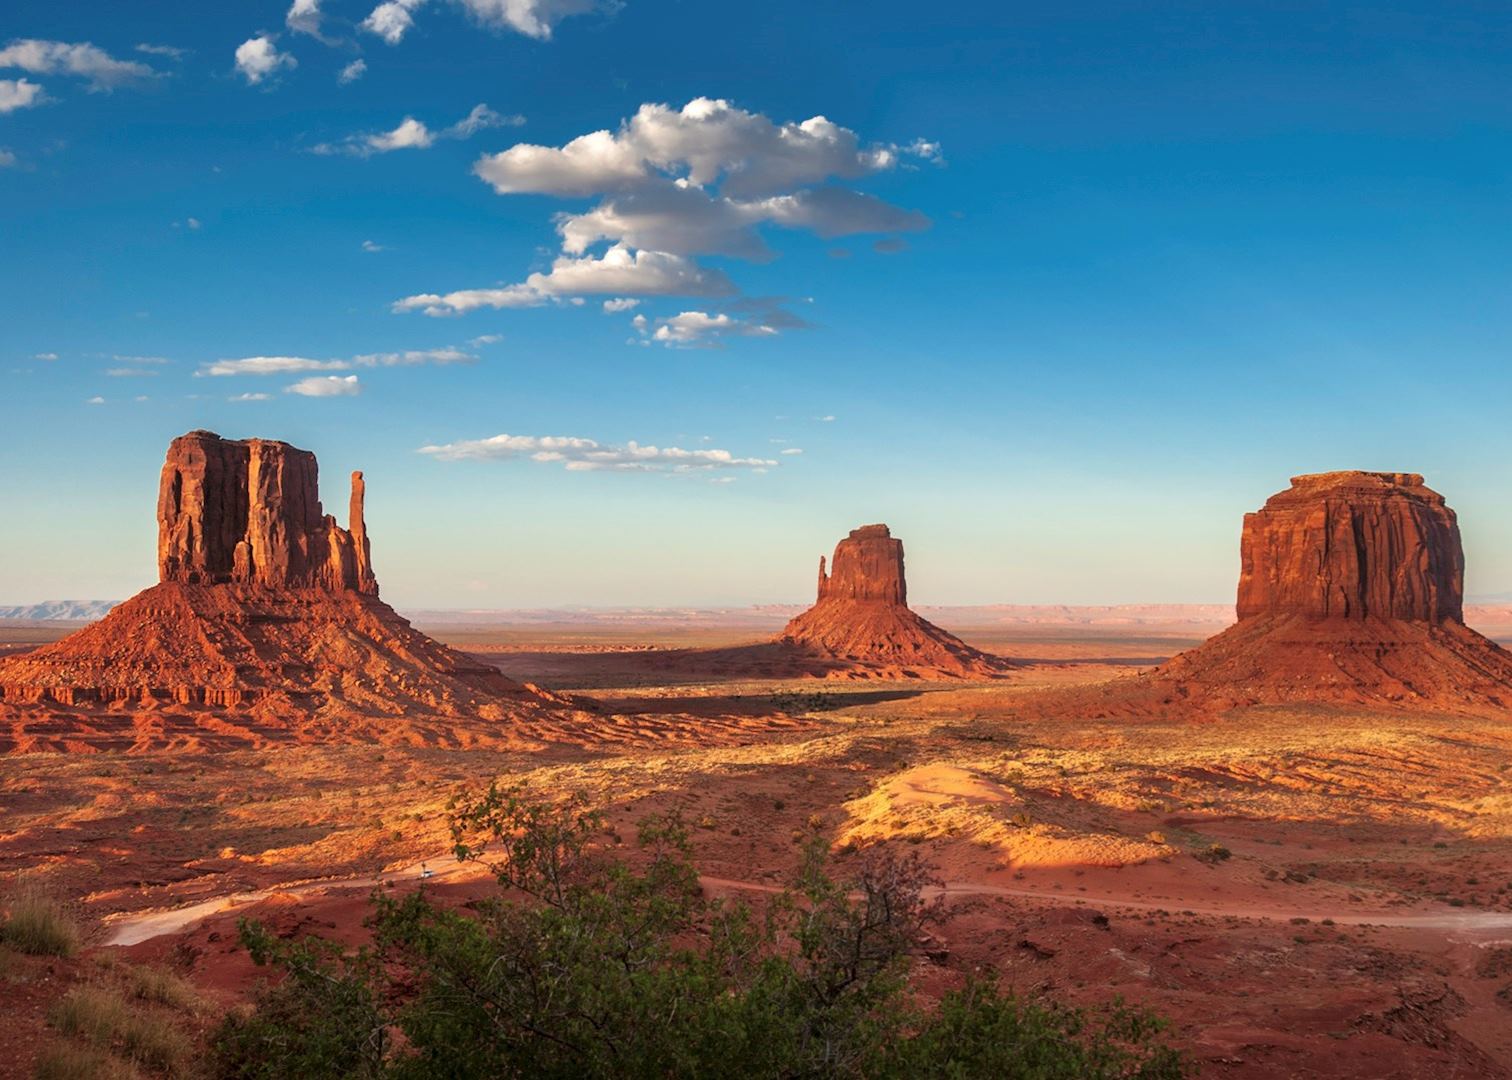 Visit Monument Valley Navajo Tribal Park | Audley Travel